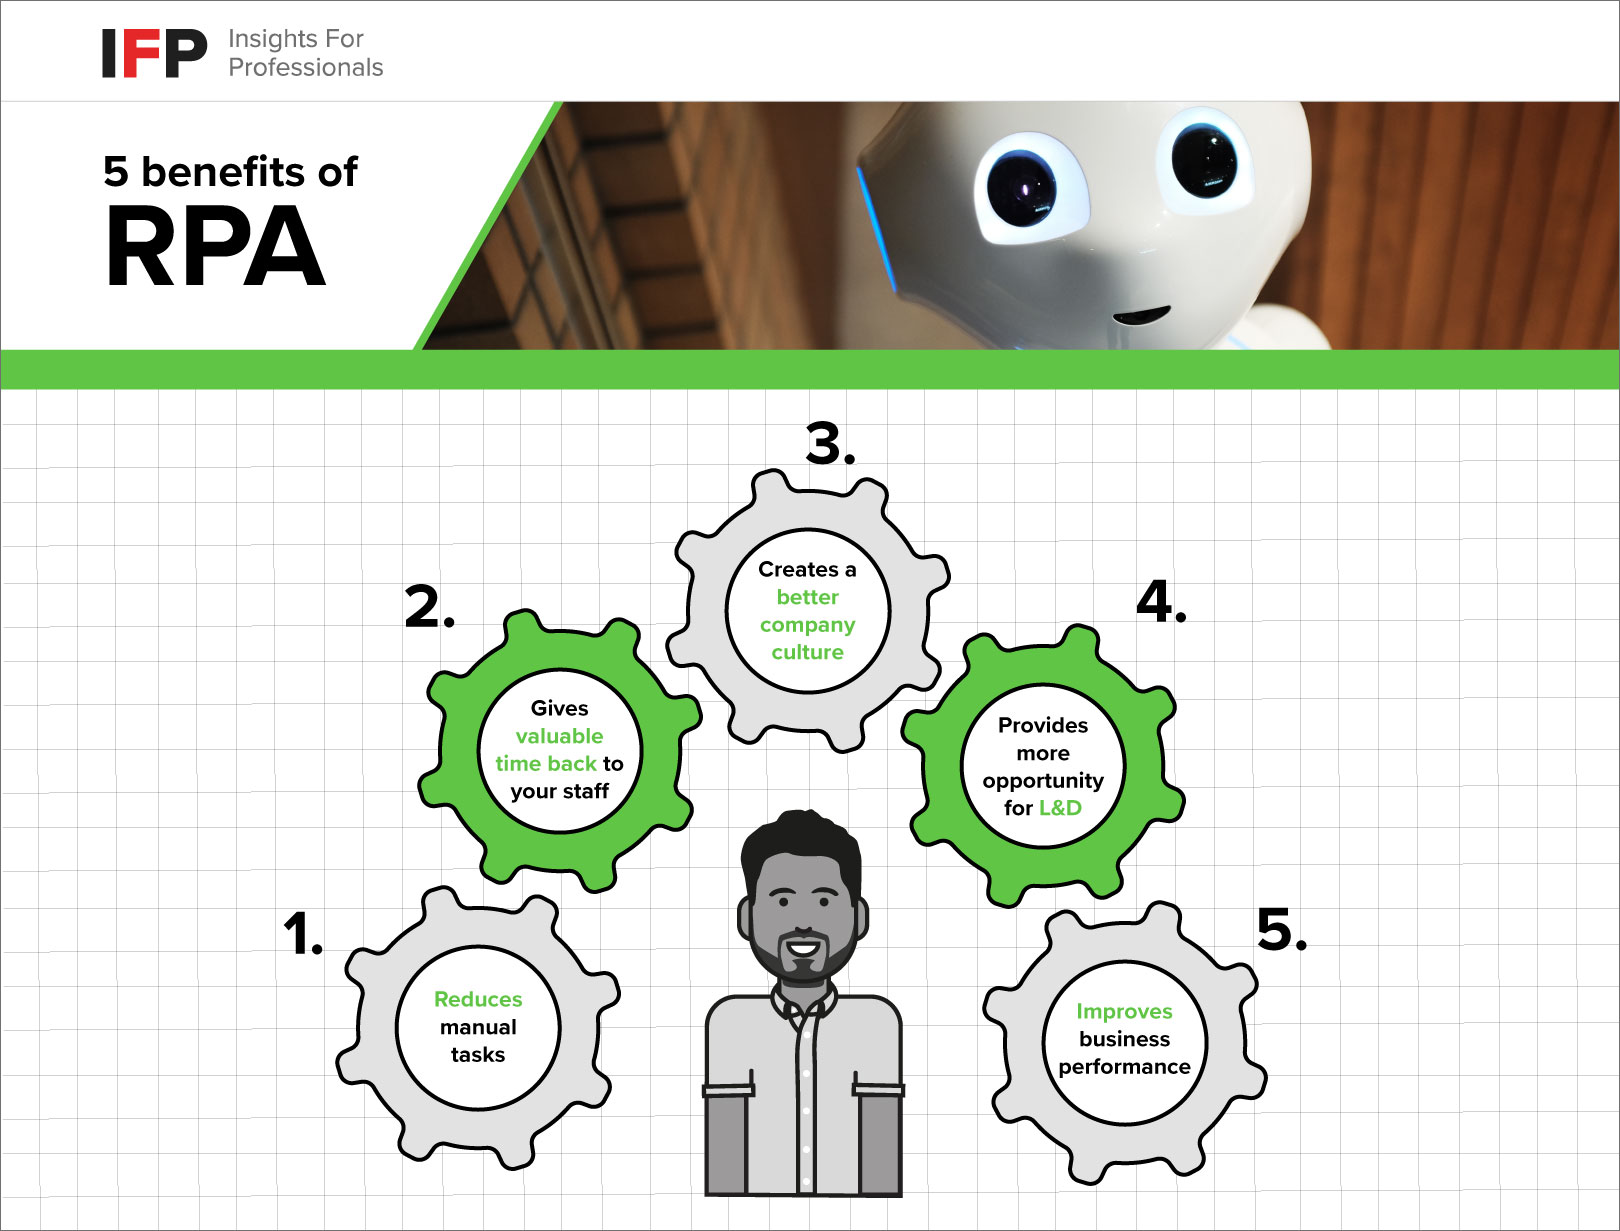 IFP diagram illustrating the main benefits of RPA in business and how it benefits employees